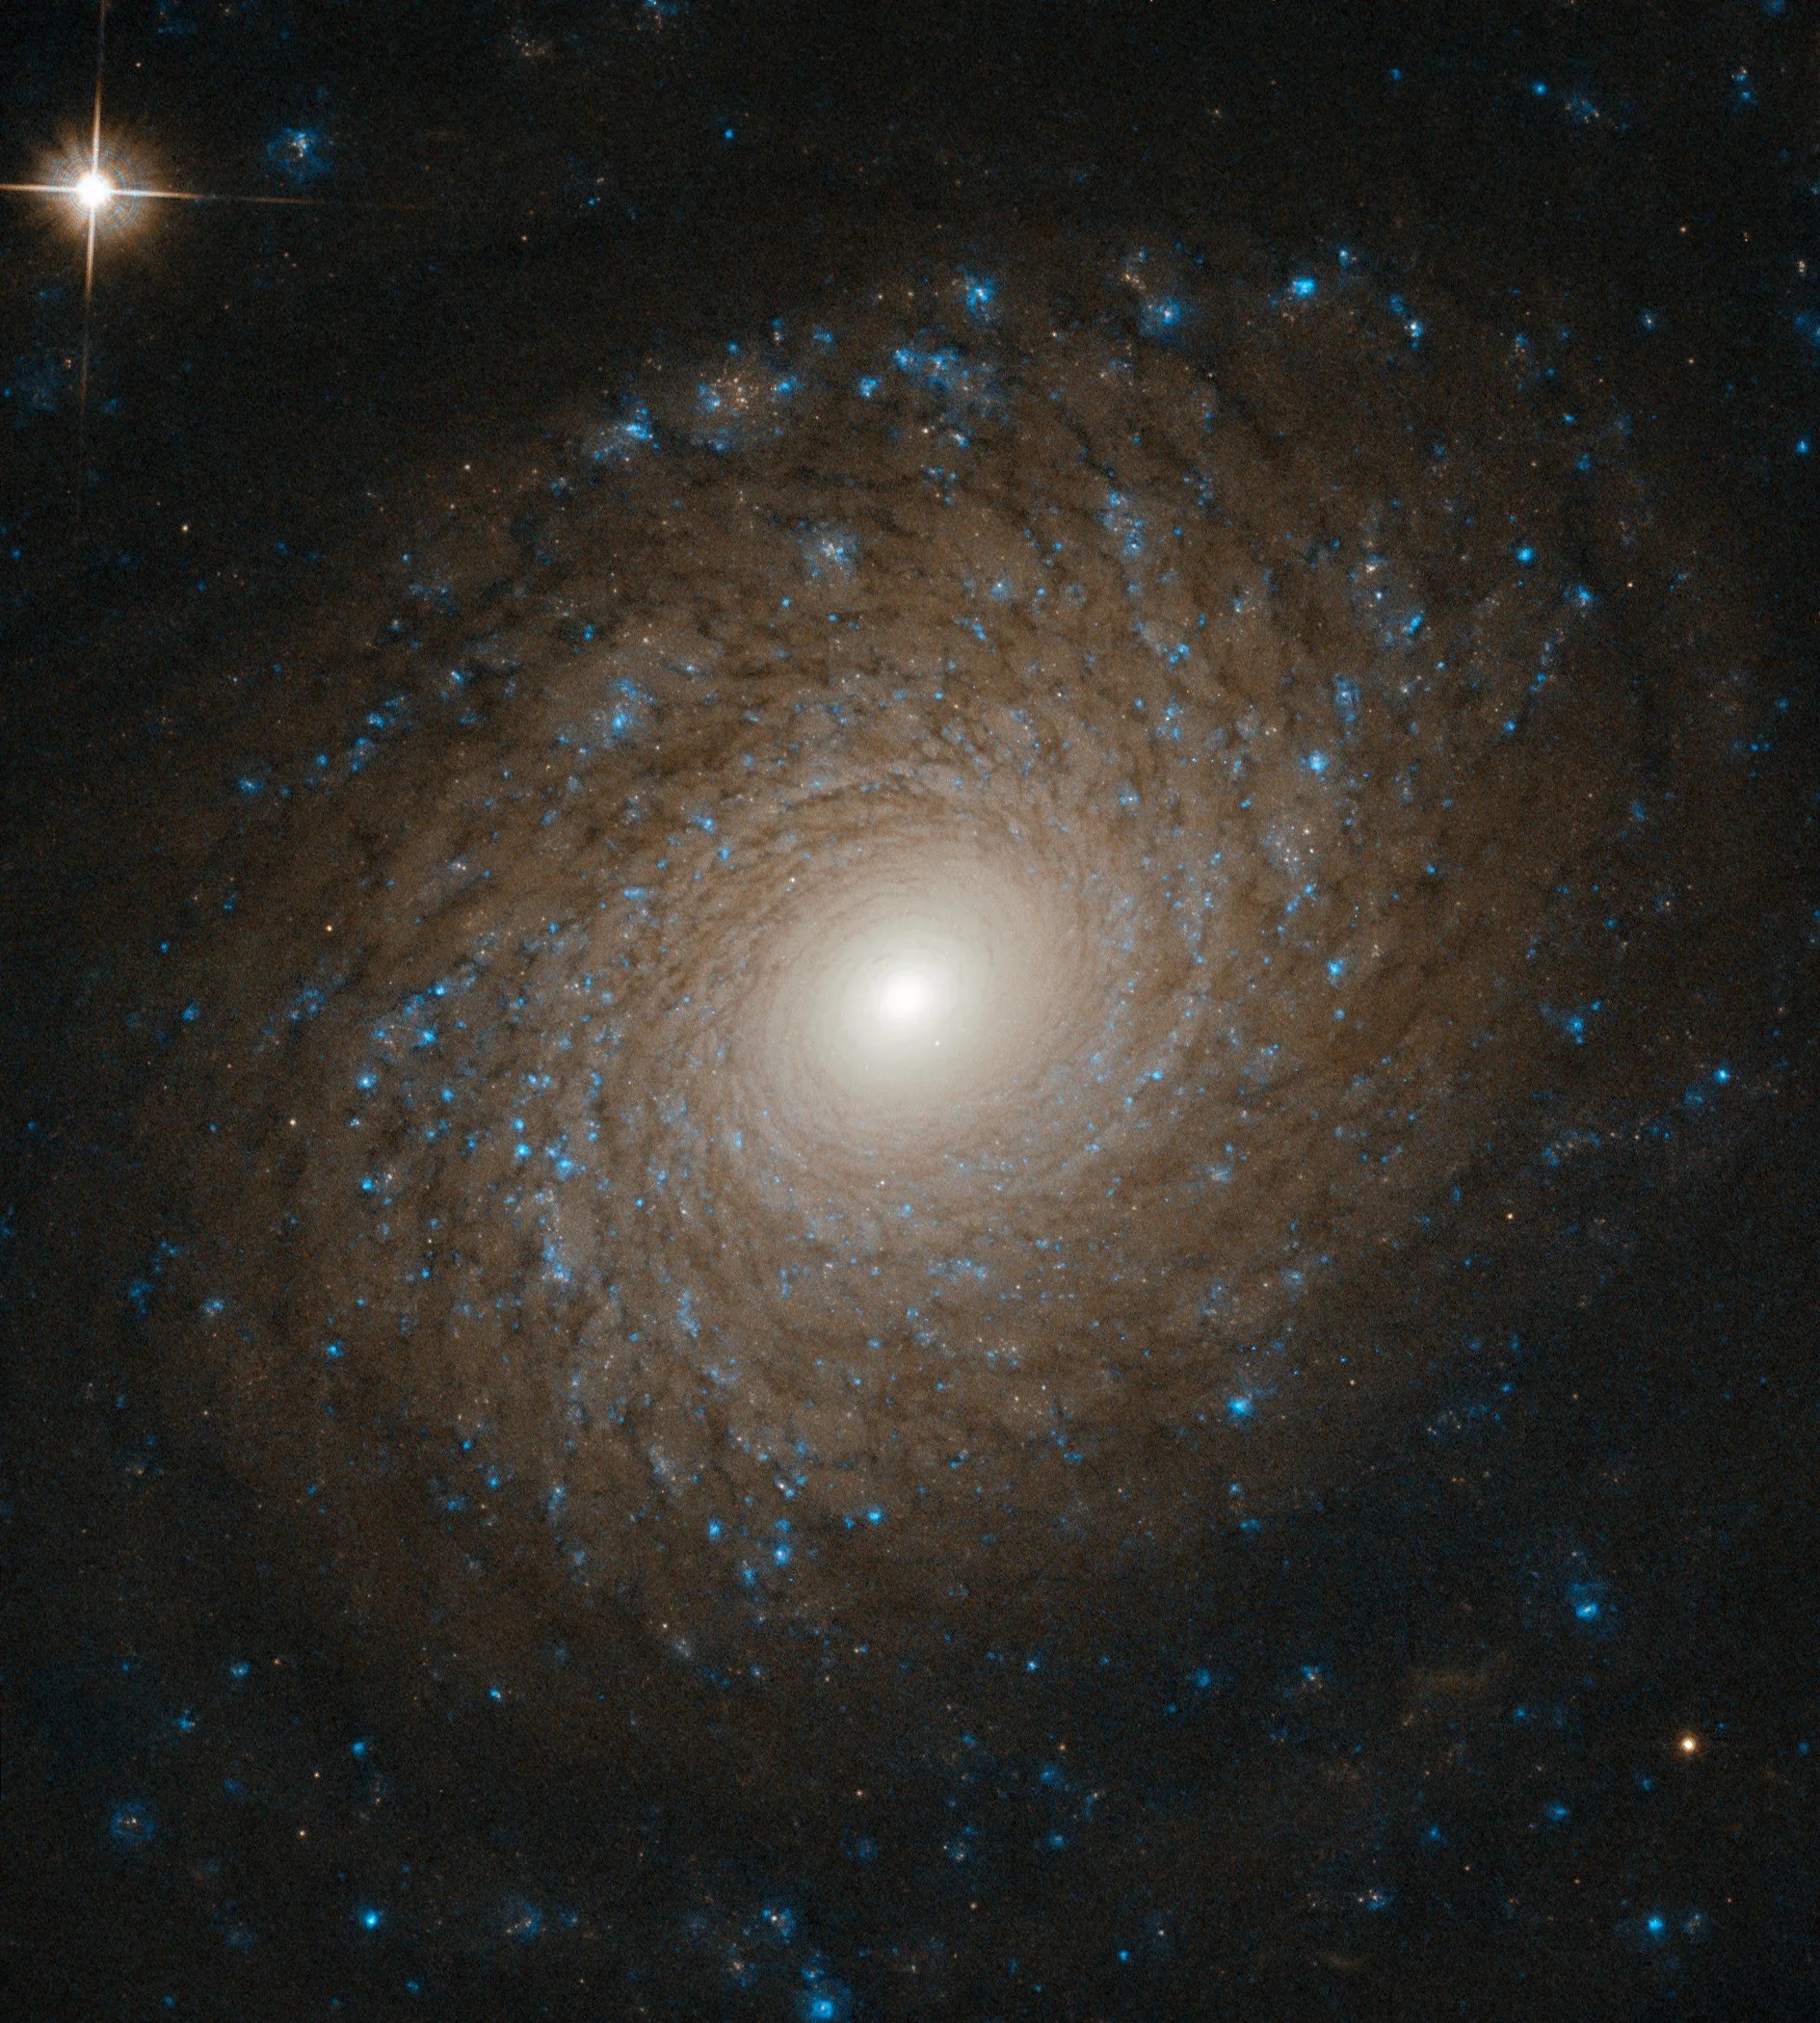 Hubble image of spiral galaxy ngc 2985